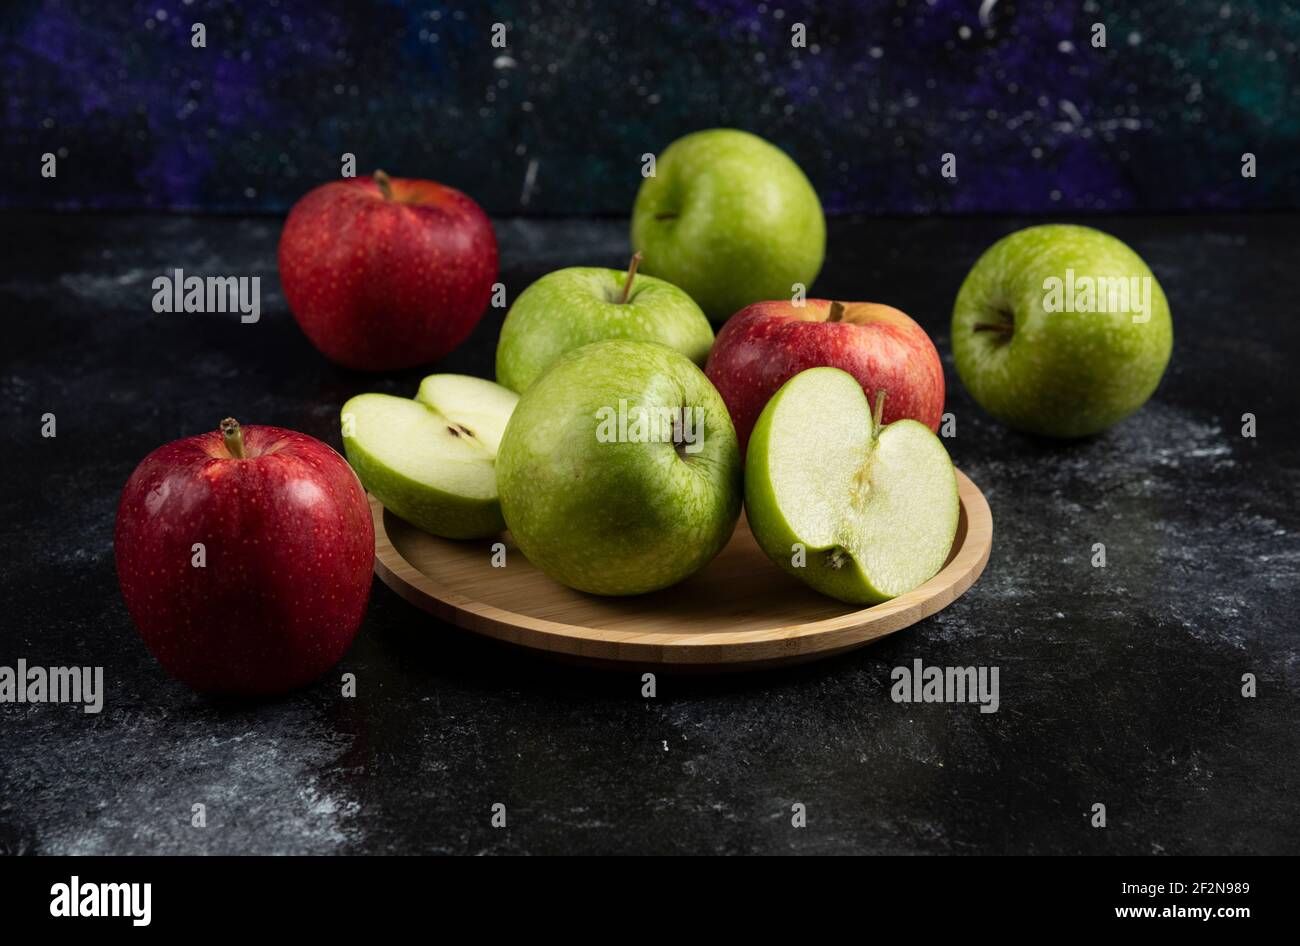 Whole and sliced green and red apples on wooden plate Stock Photo